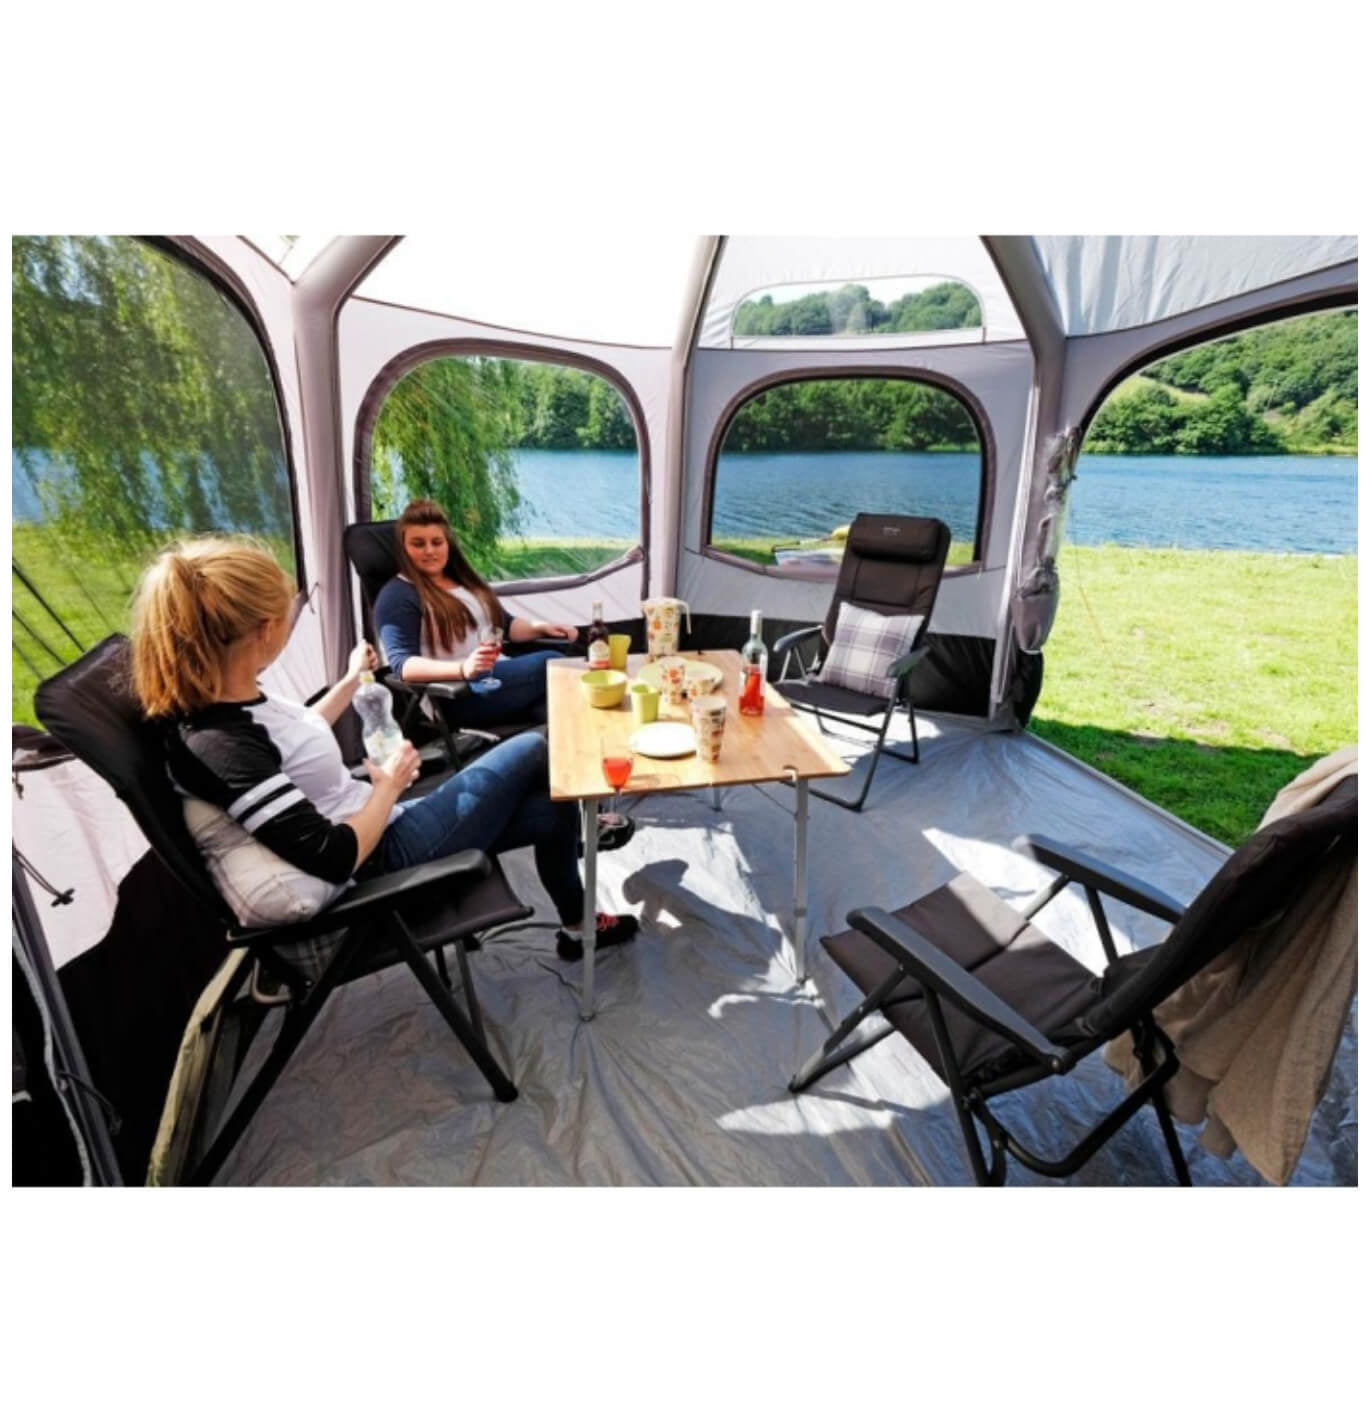 Hexaway living space with people enjoying picnic